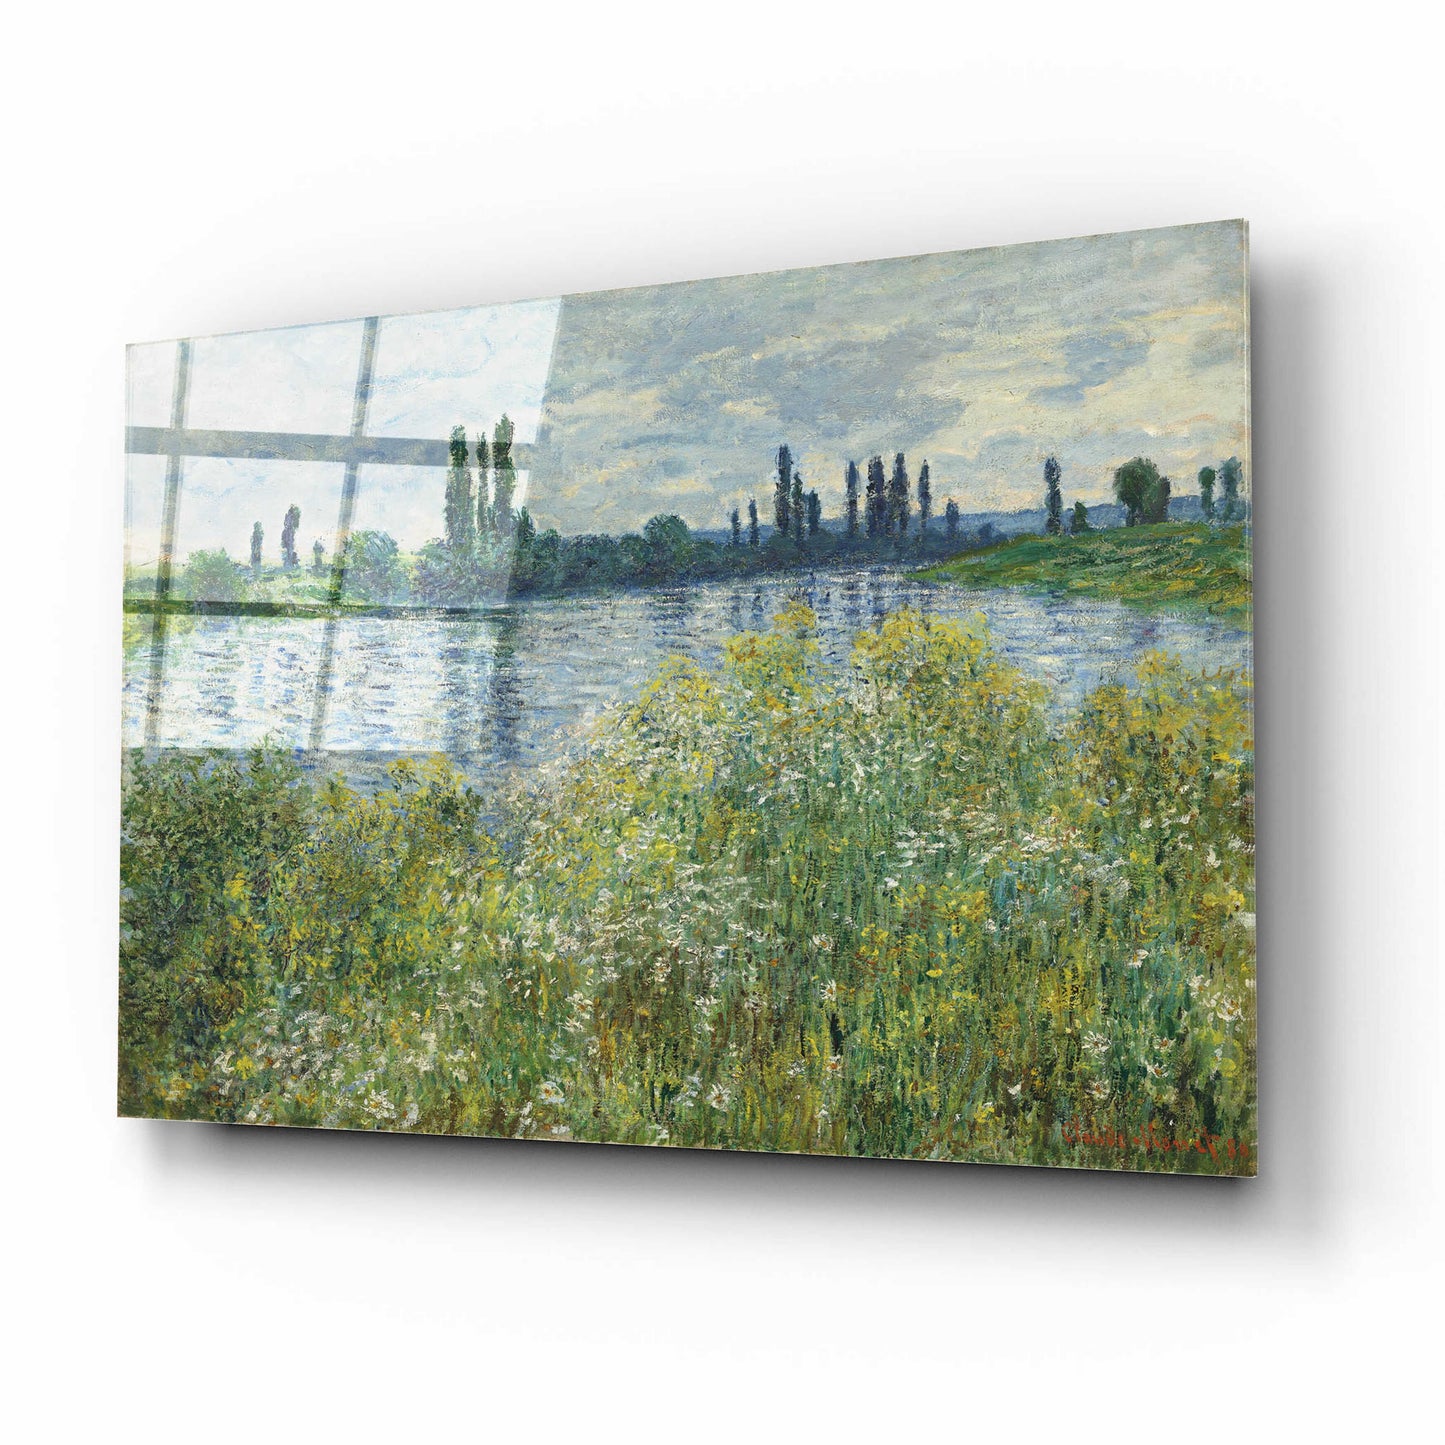 Epic Art 'Banks Od The Seine, Vetheuil' by Claude Monet, Acrylic Glass Wall Art,16x12